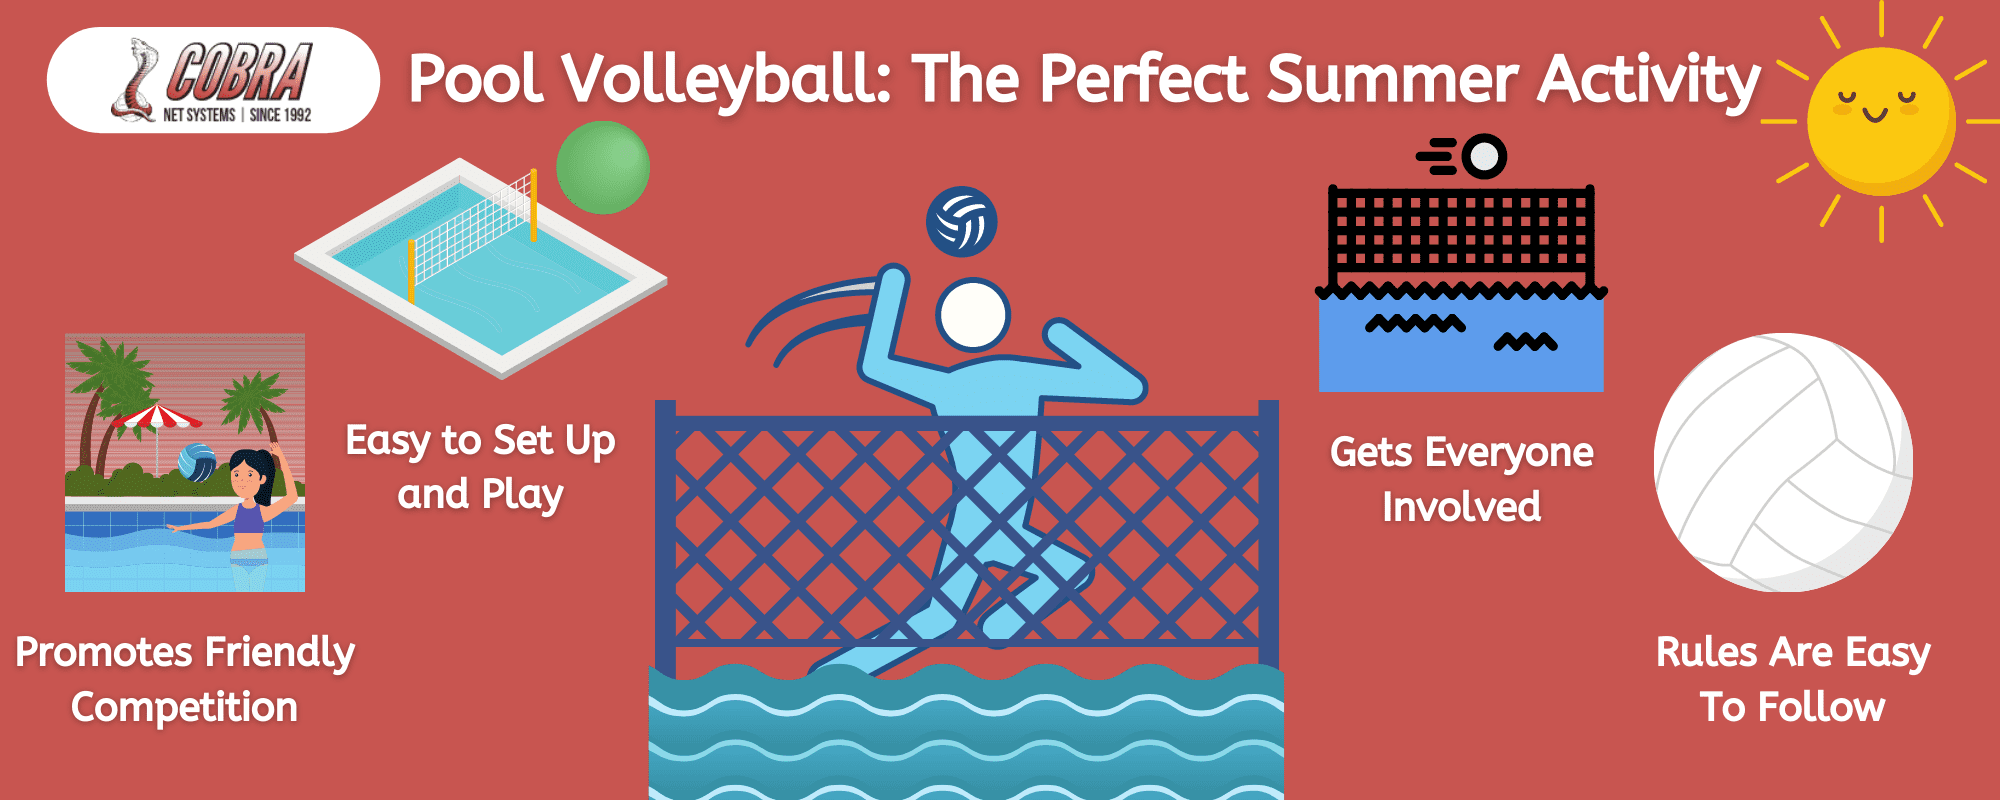 Infographic detailing why pool volleyball is the perfect summer activity